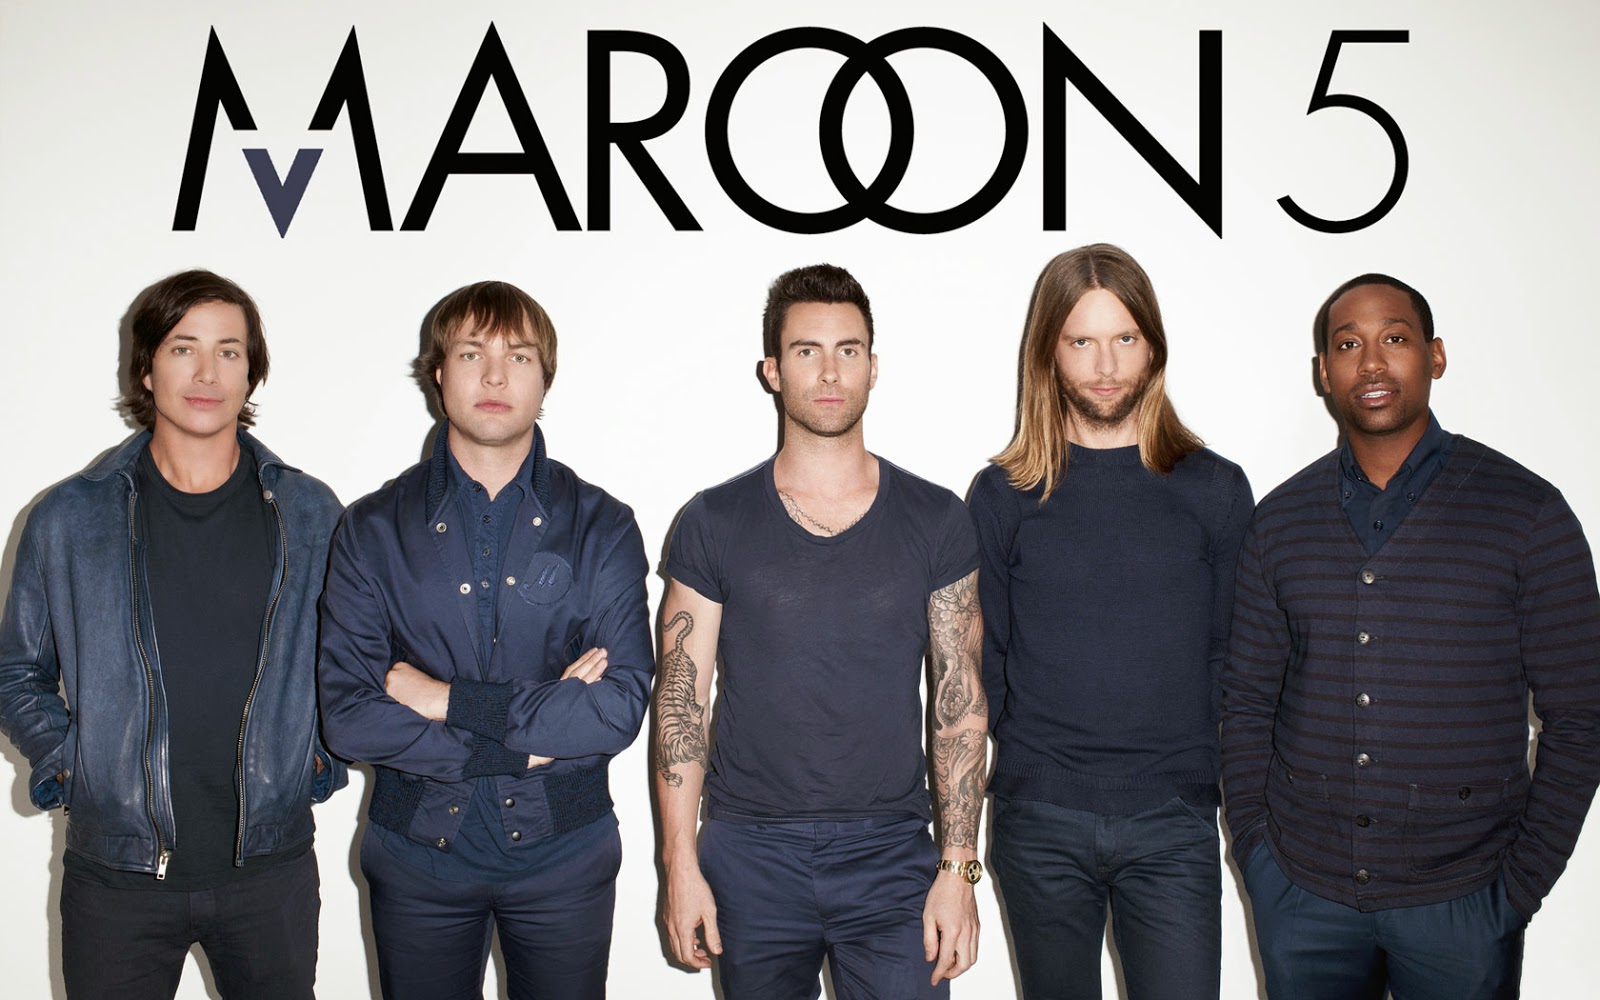 Russian Concert Tickets In New York Maroon 5 March 05 08